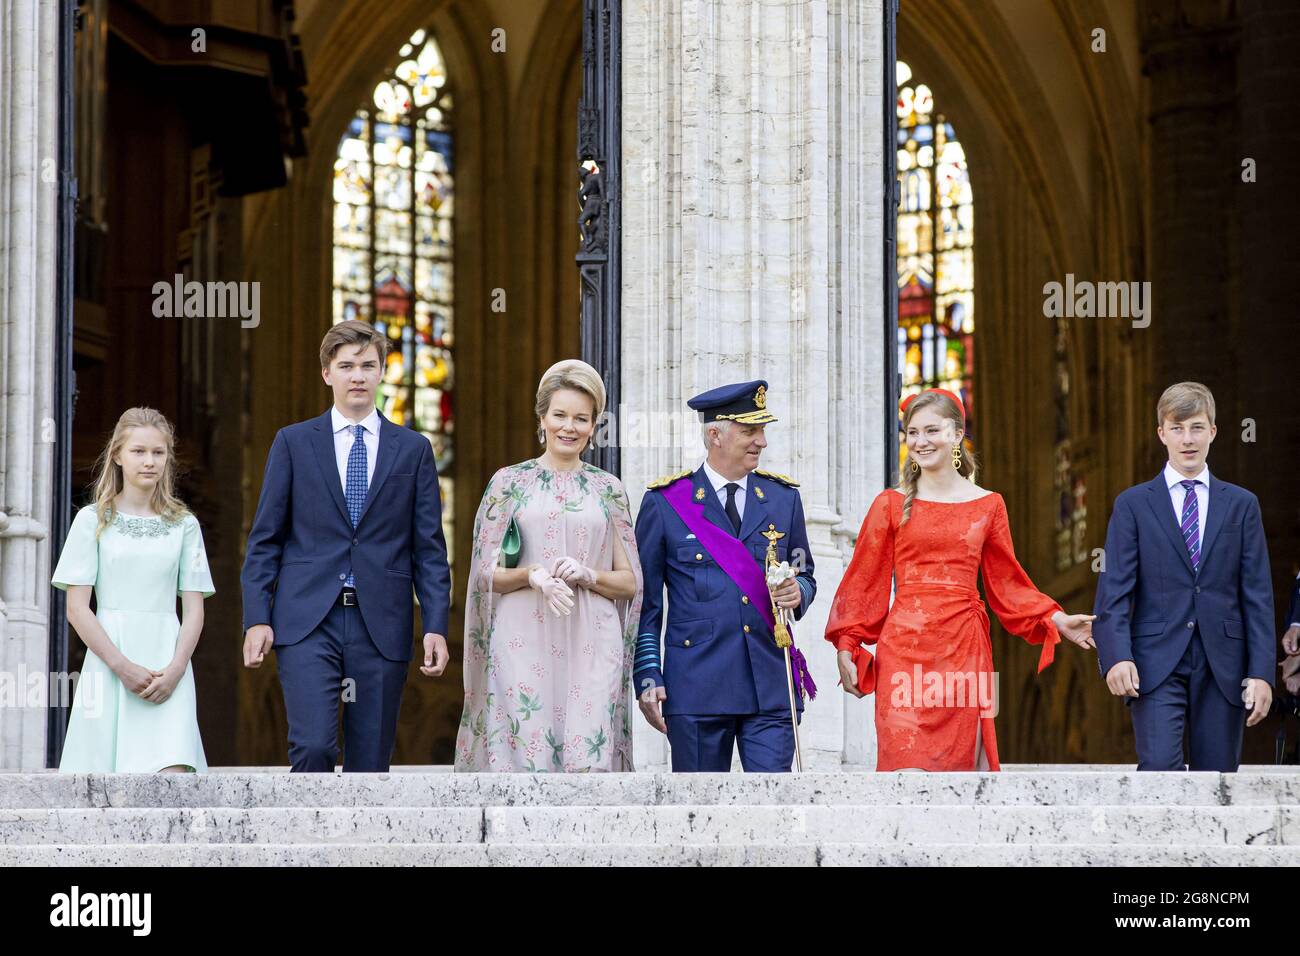 King Philippe of Belgium, Queen Mathilde of Belgium, Princess Elisabeth of Belgium, Prince Gabriel of Belgium, Prince Emmanuel of Belgium and Princess Eleonore of Belgium attend the Te Deum Mass at the National day in the Cathedral on July 21, 2021 in Brussels, Belgium. robin utrecht Photo by Robin Utrecht/ABACAPRESS.COM Stock Photo